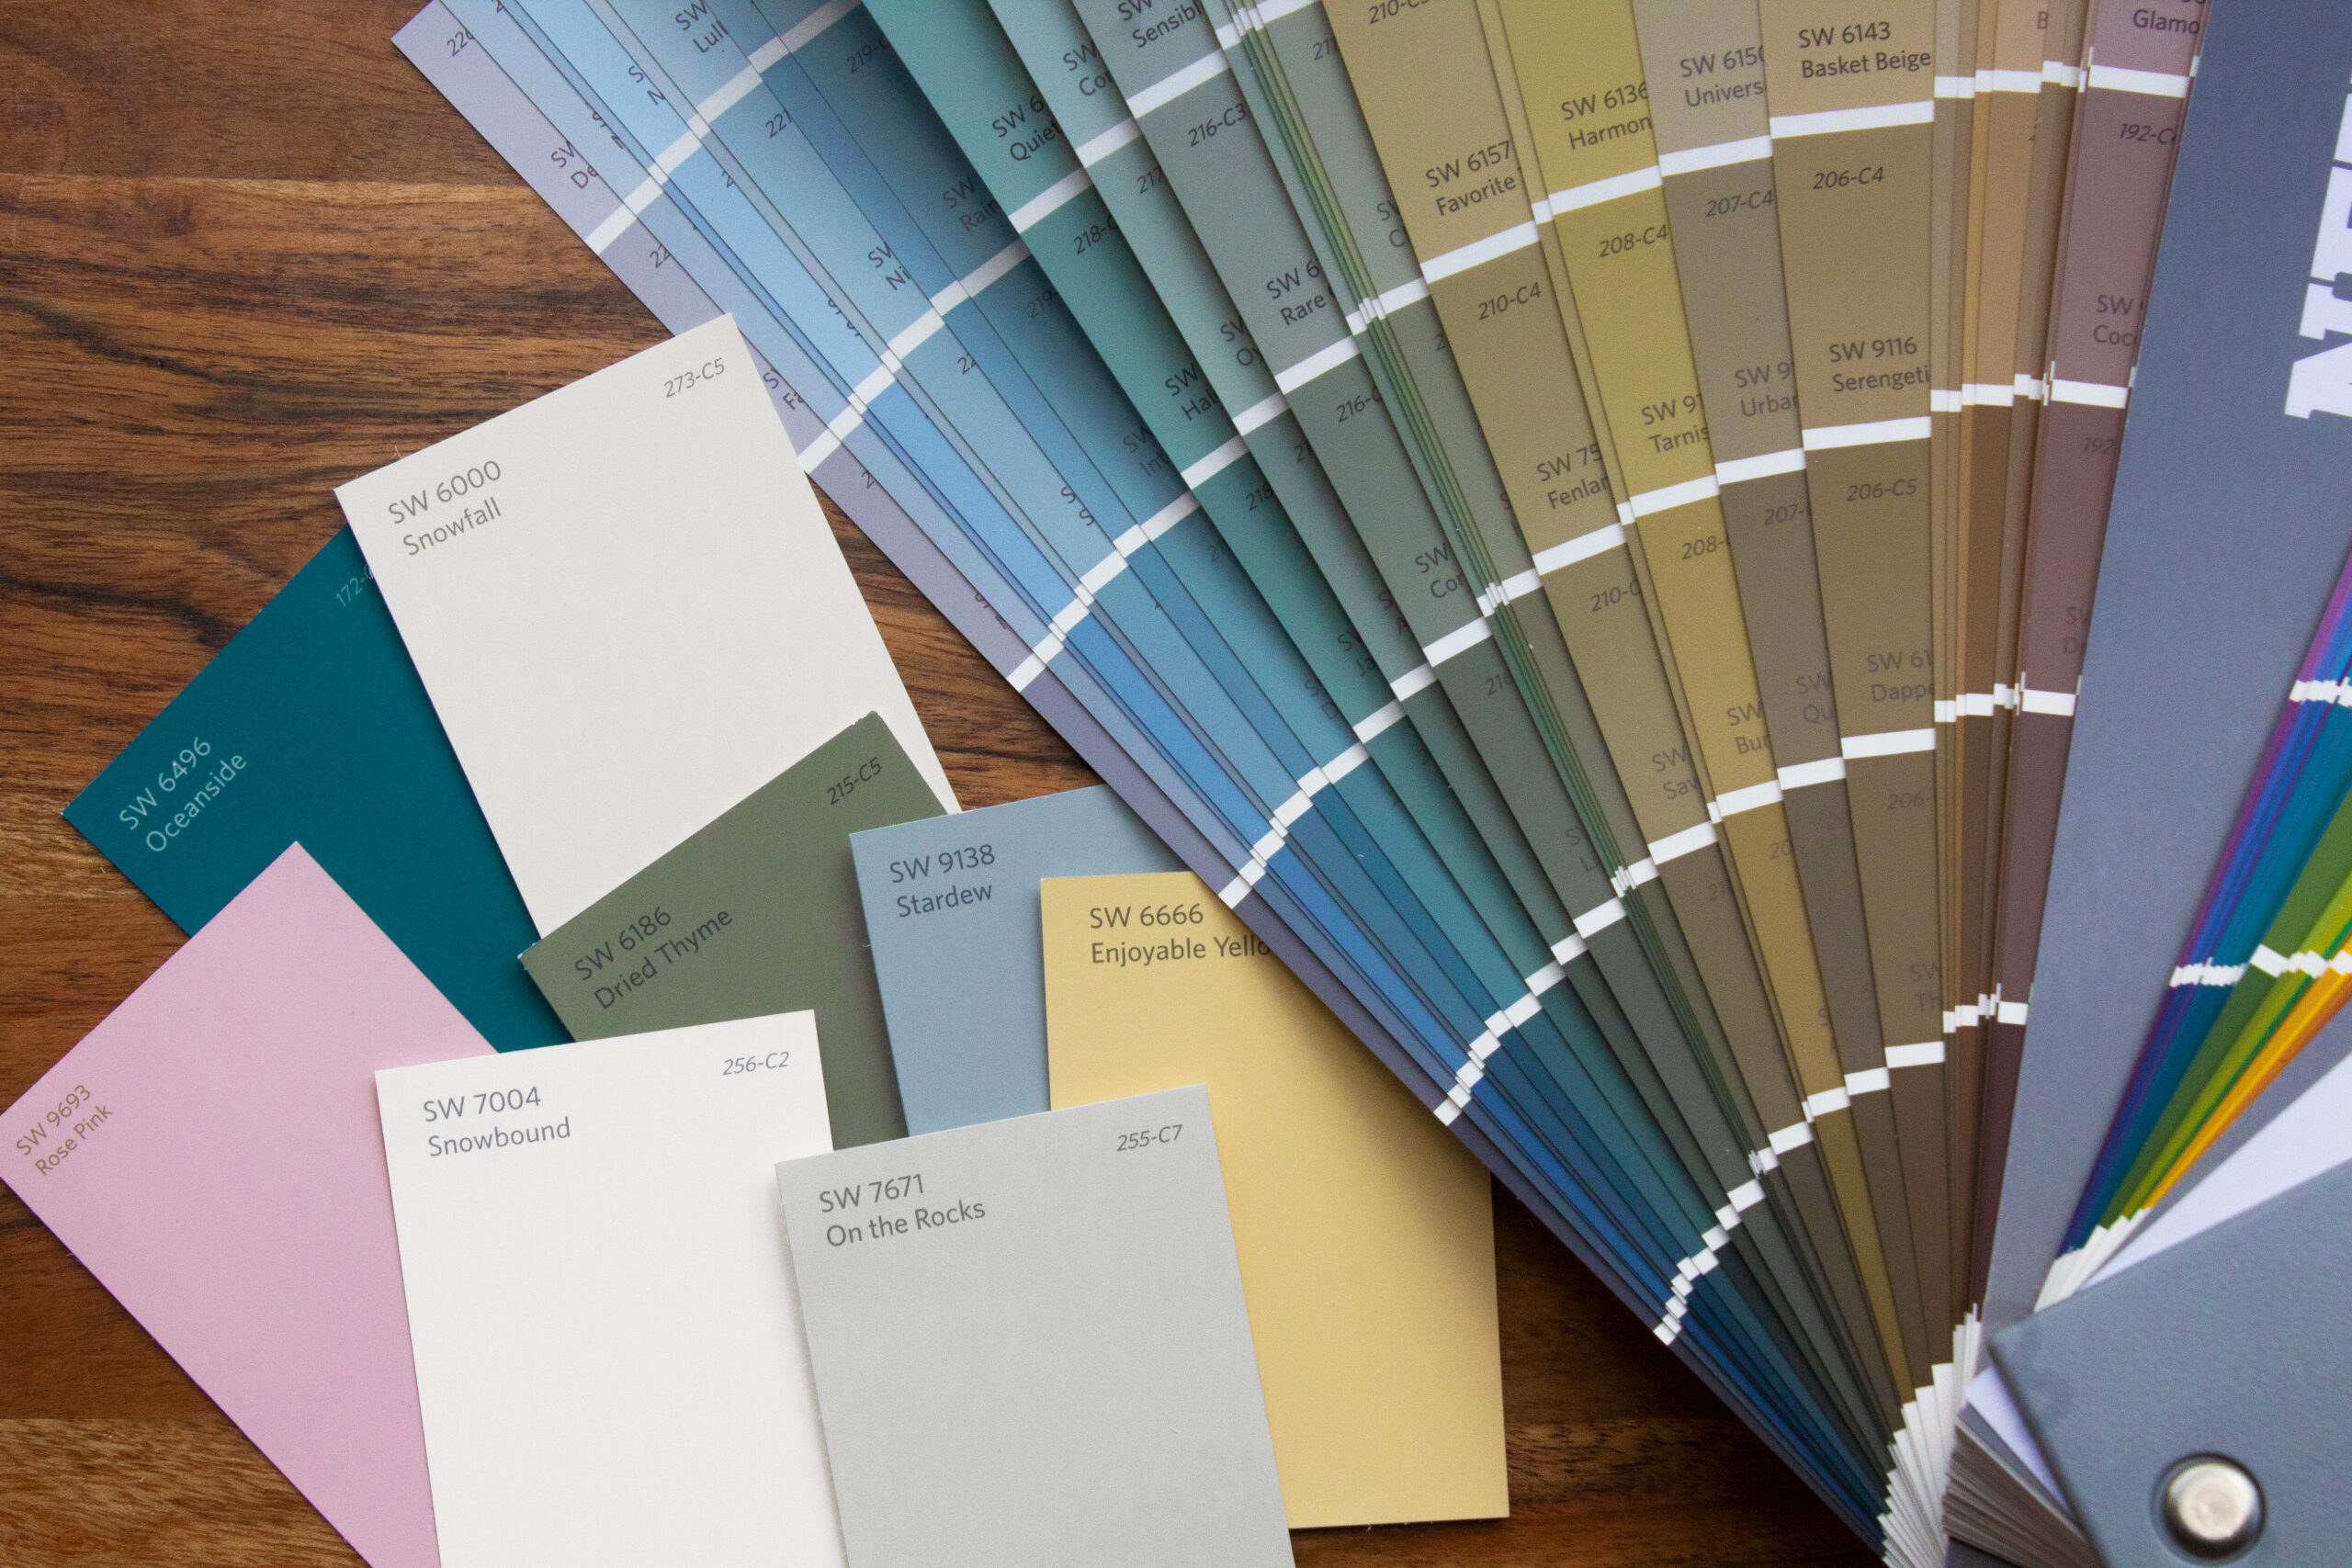 A Sherwin-Williams paint strip fan deck next to individual color chips.